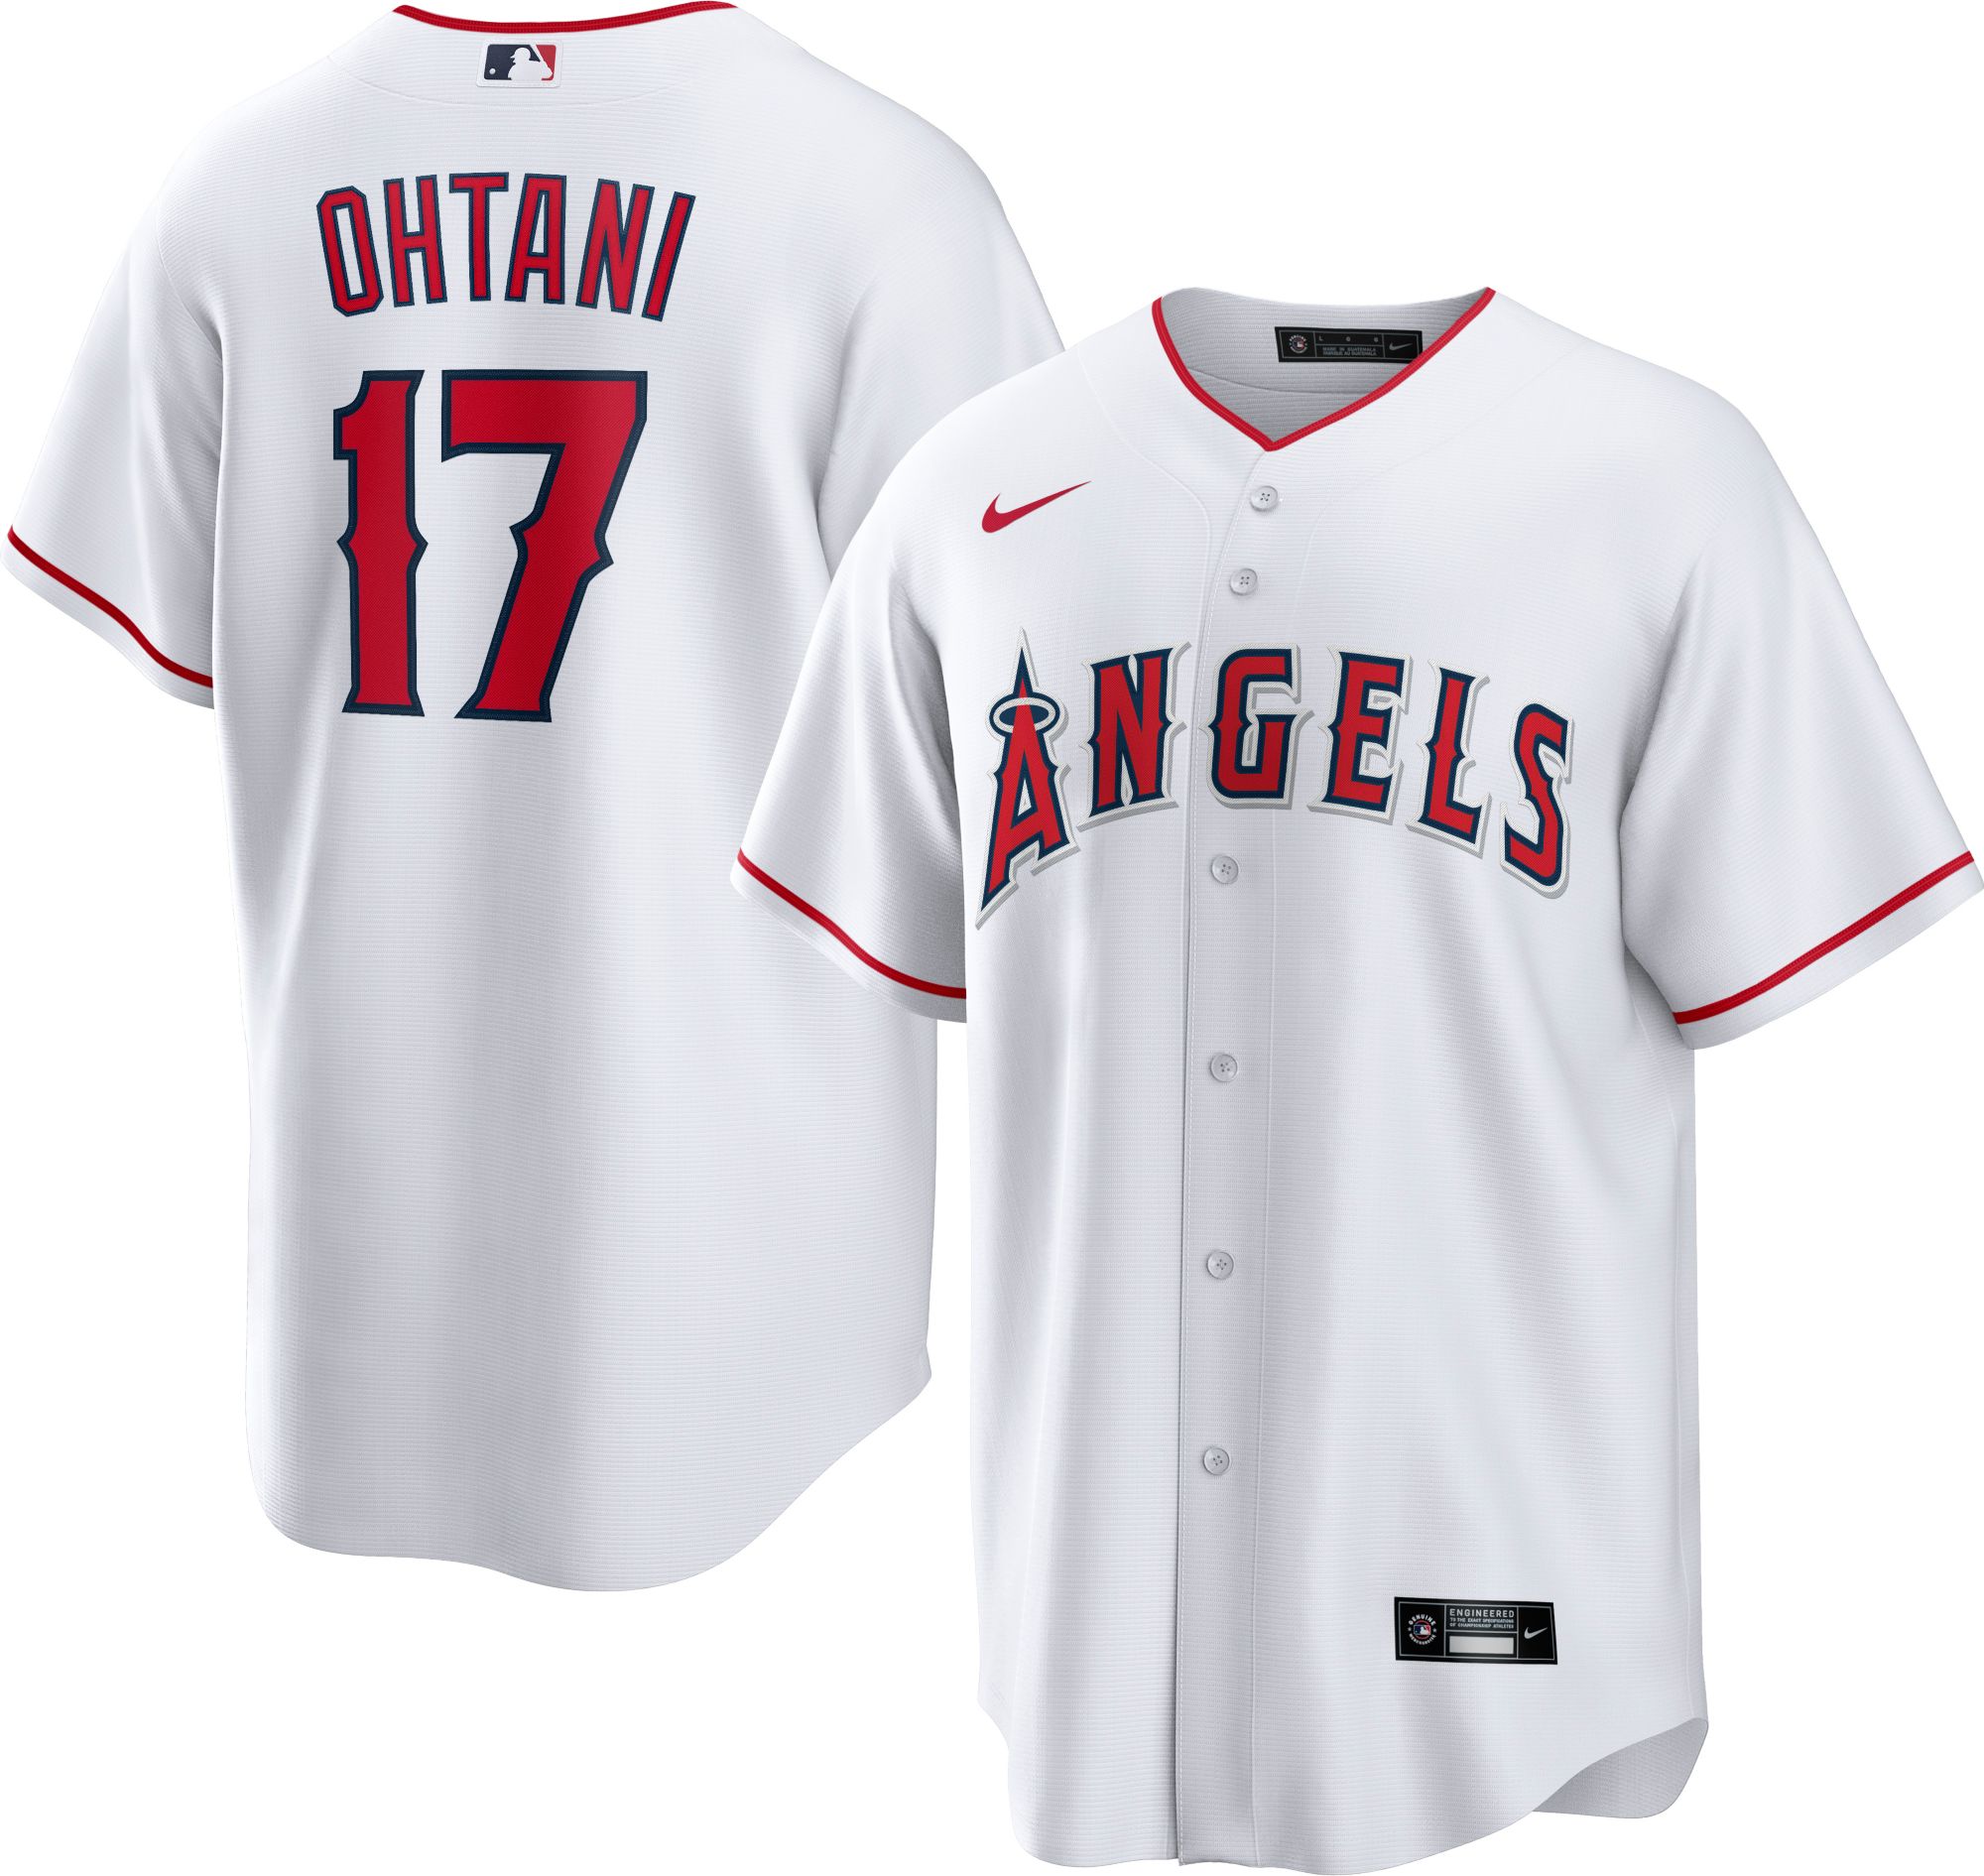 2022 Mike Trout Game Used White Jersey - 44th Career Home Run vs